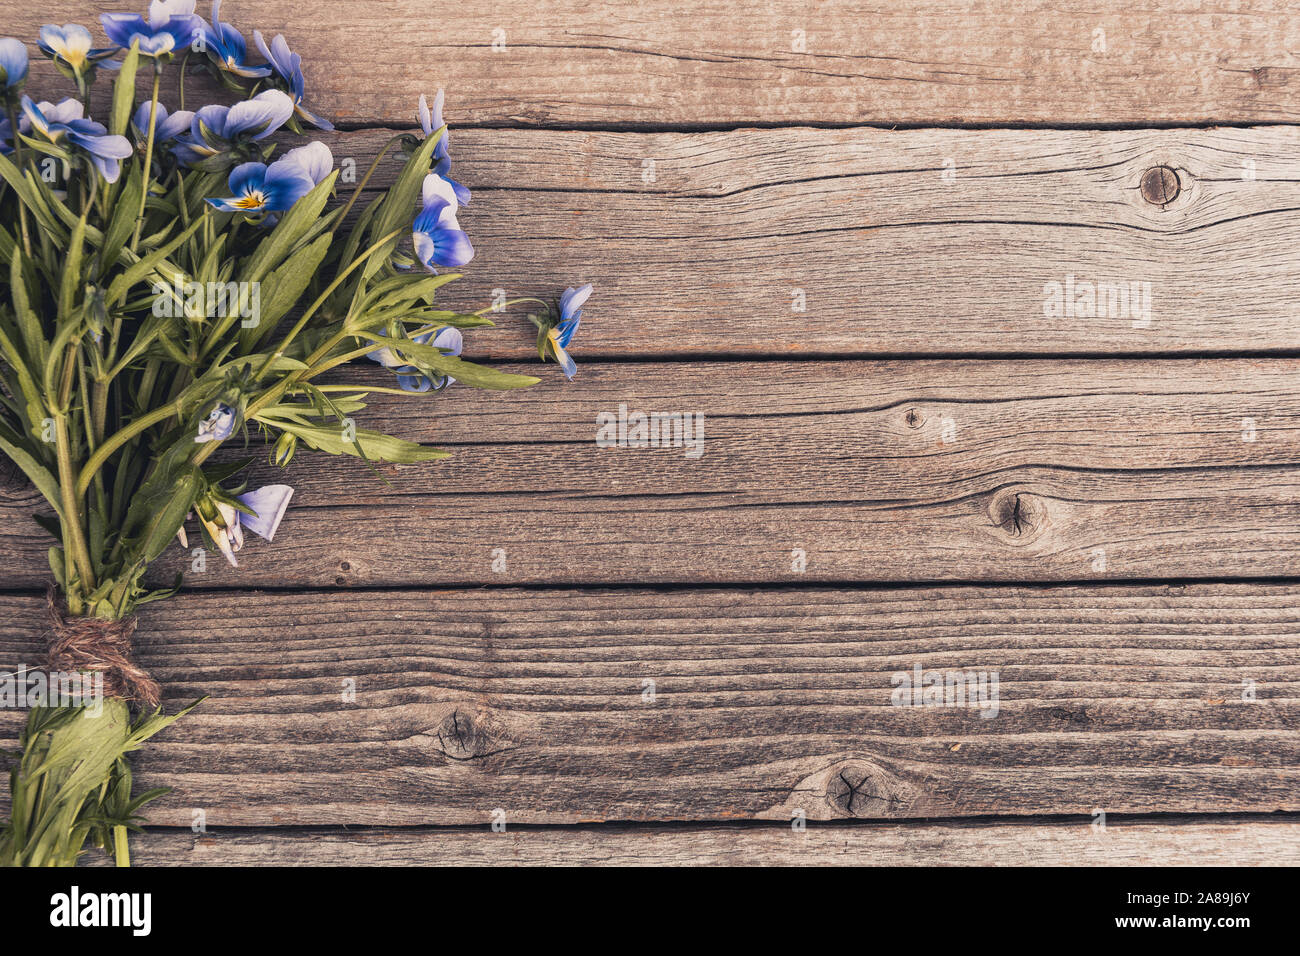 Bouquet of purple violets on wooden table. Old boards with garden flowers Stock Photo